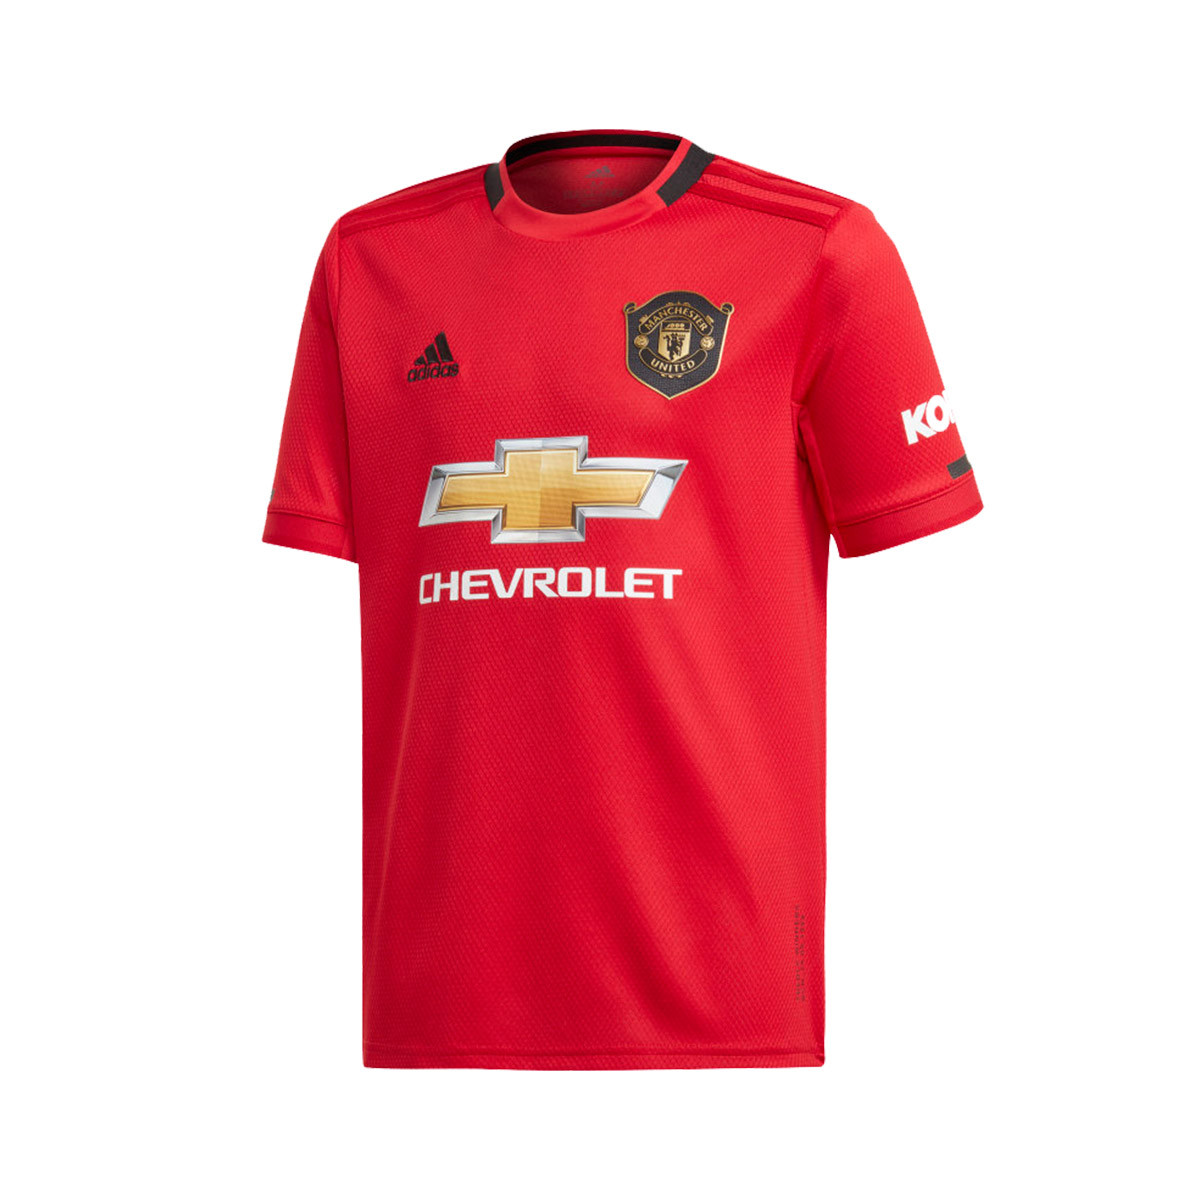 manchester united new jersey 2020